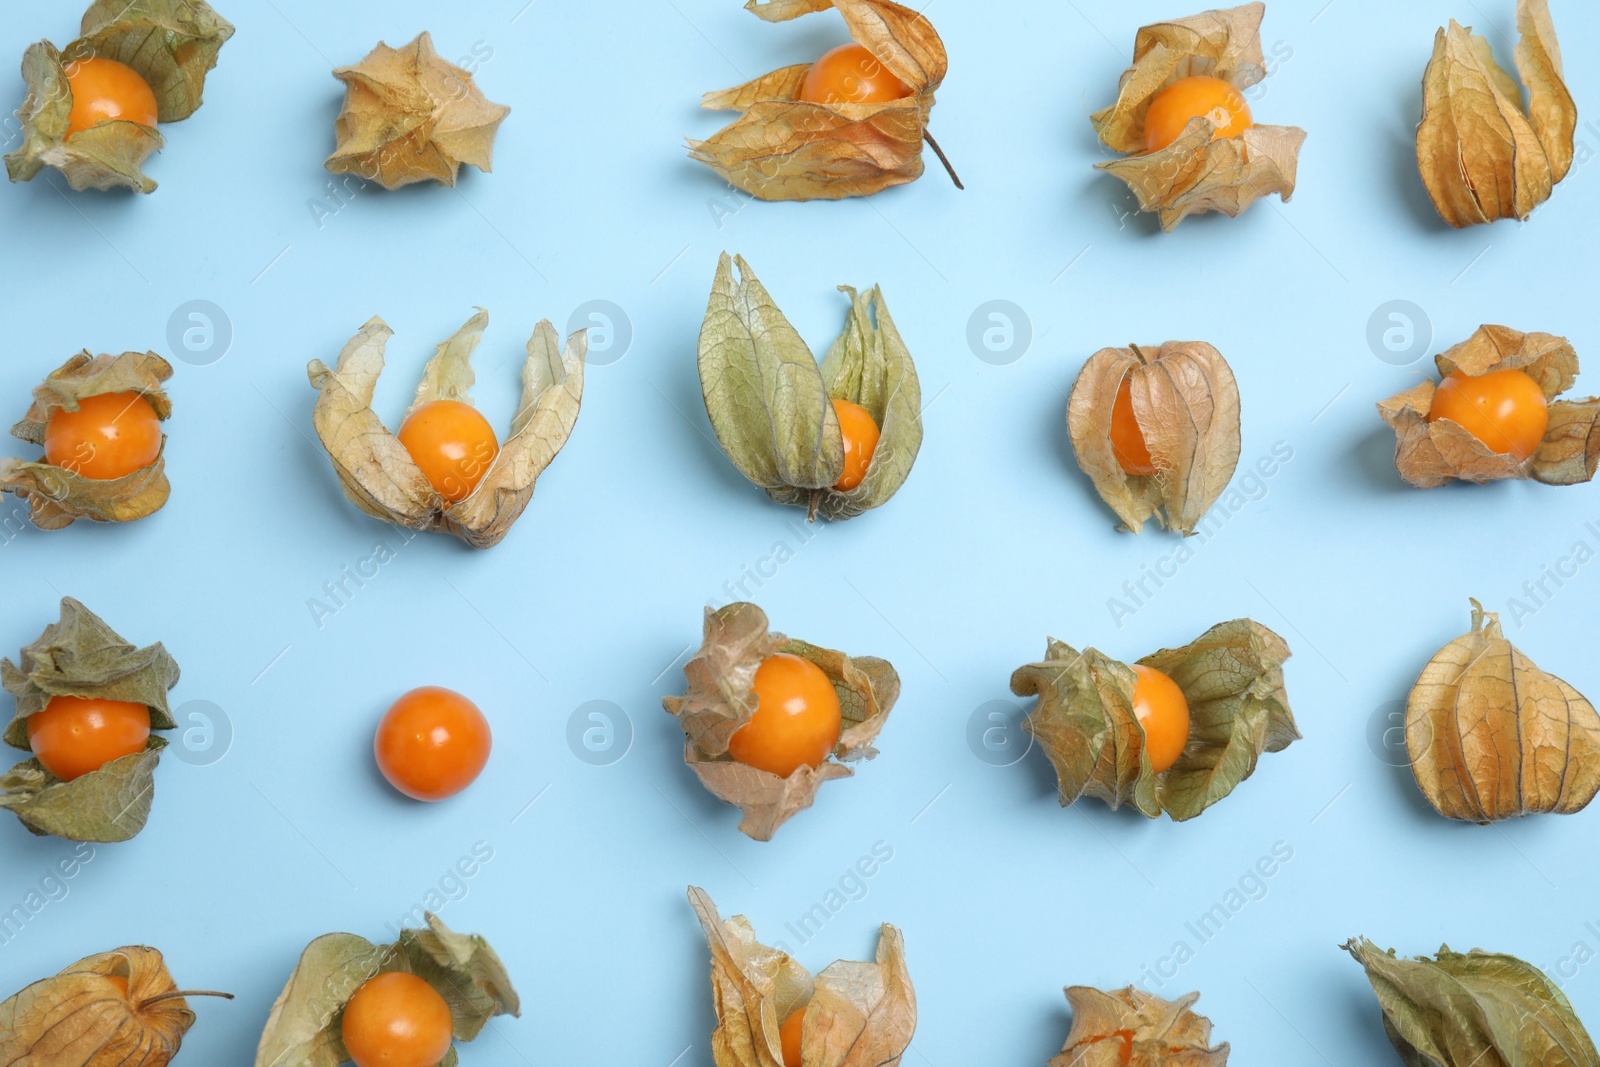 Photo of Ripe physalis fruits with dry husk on light blue background, flat lay